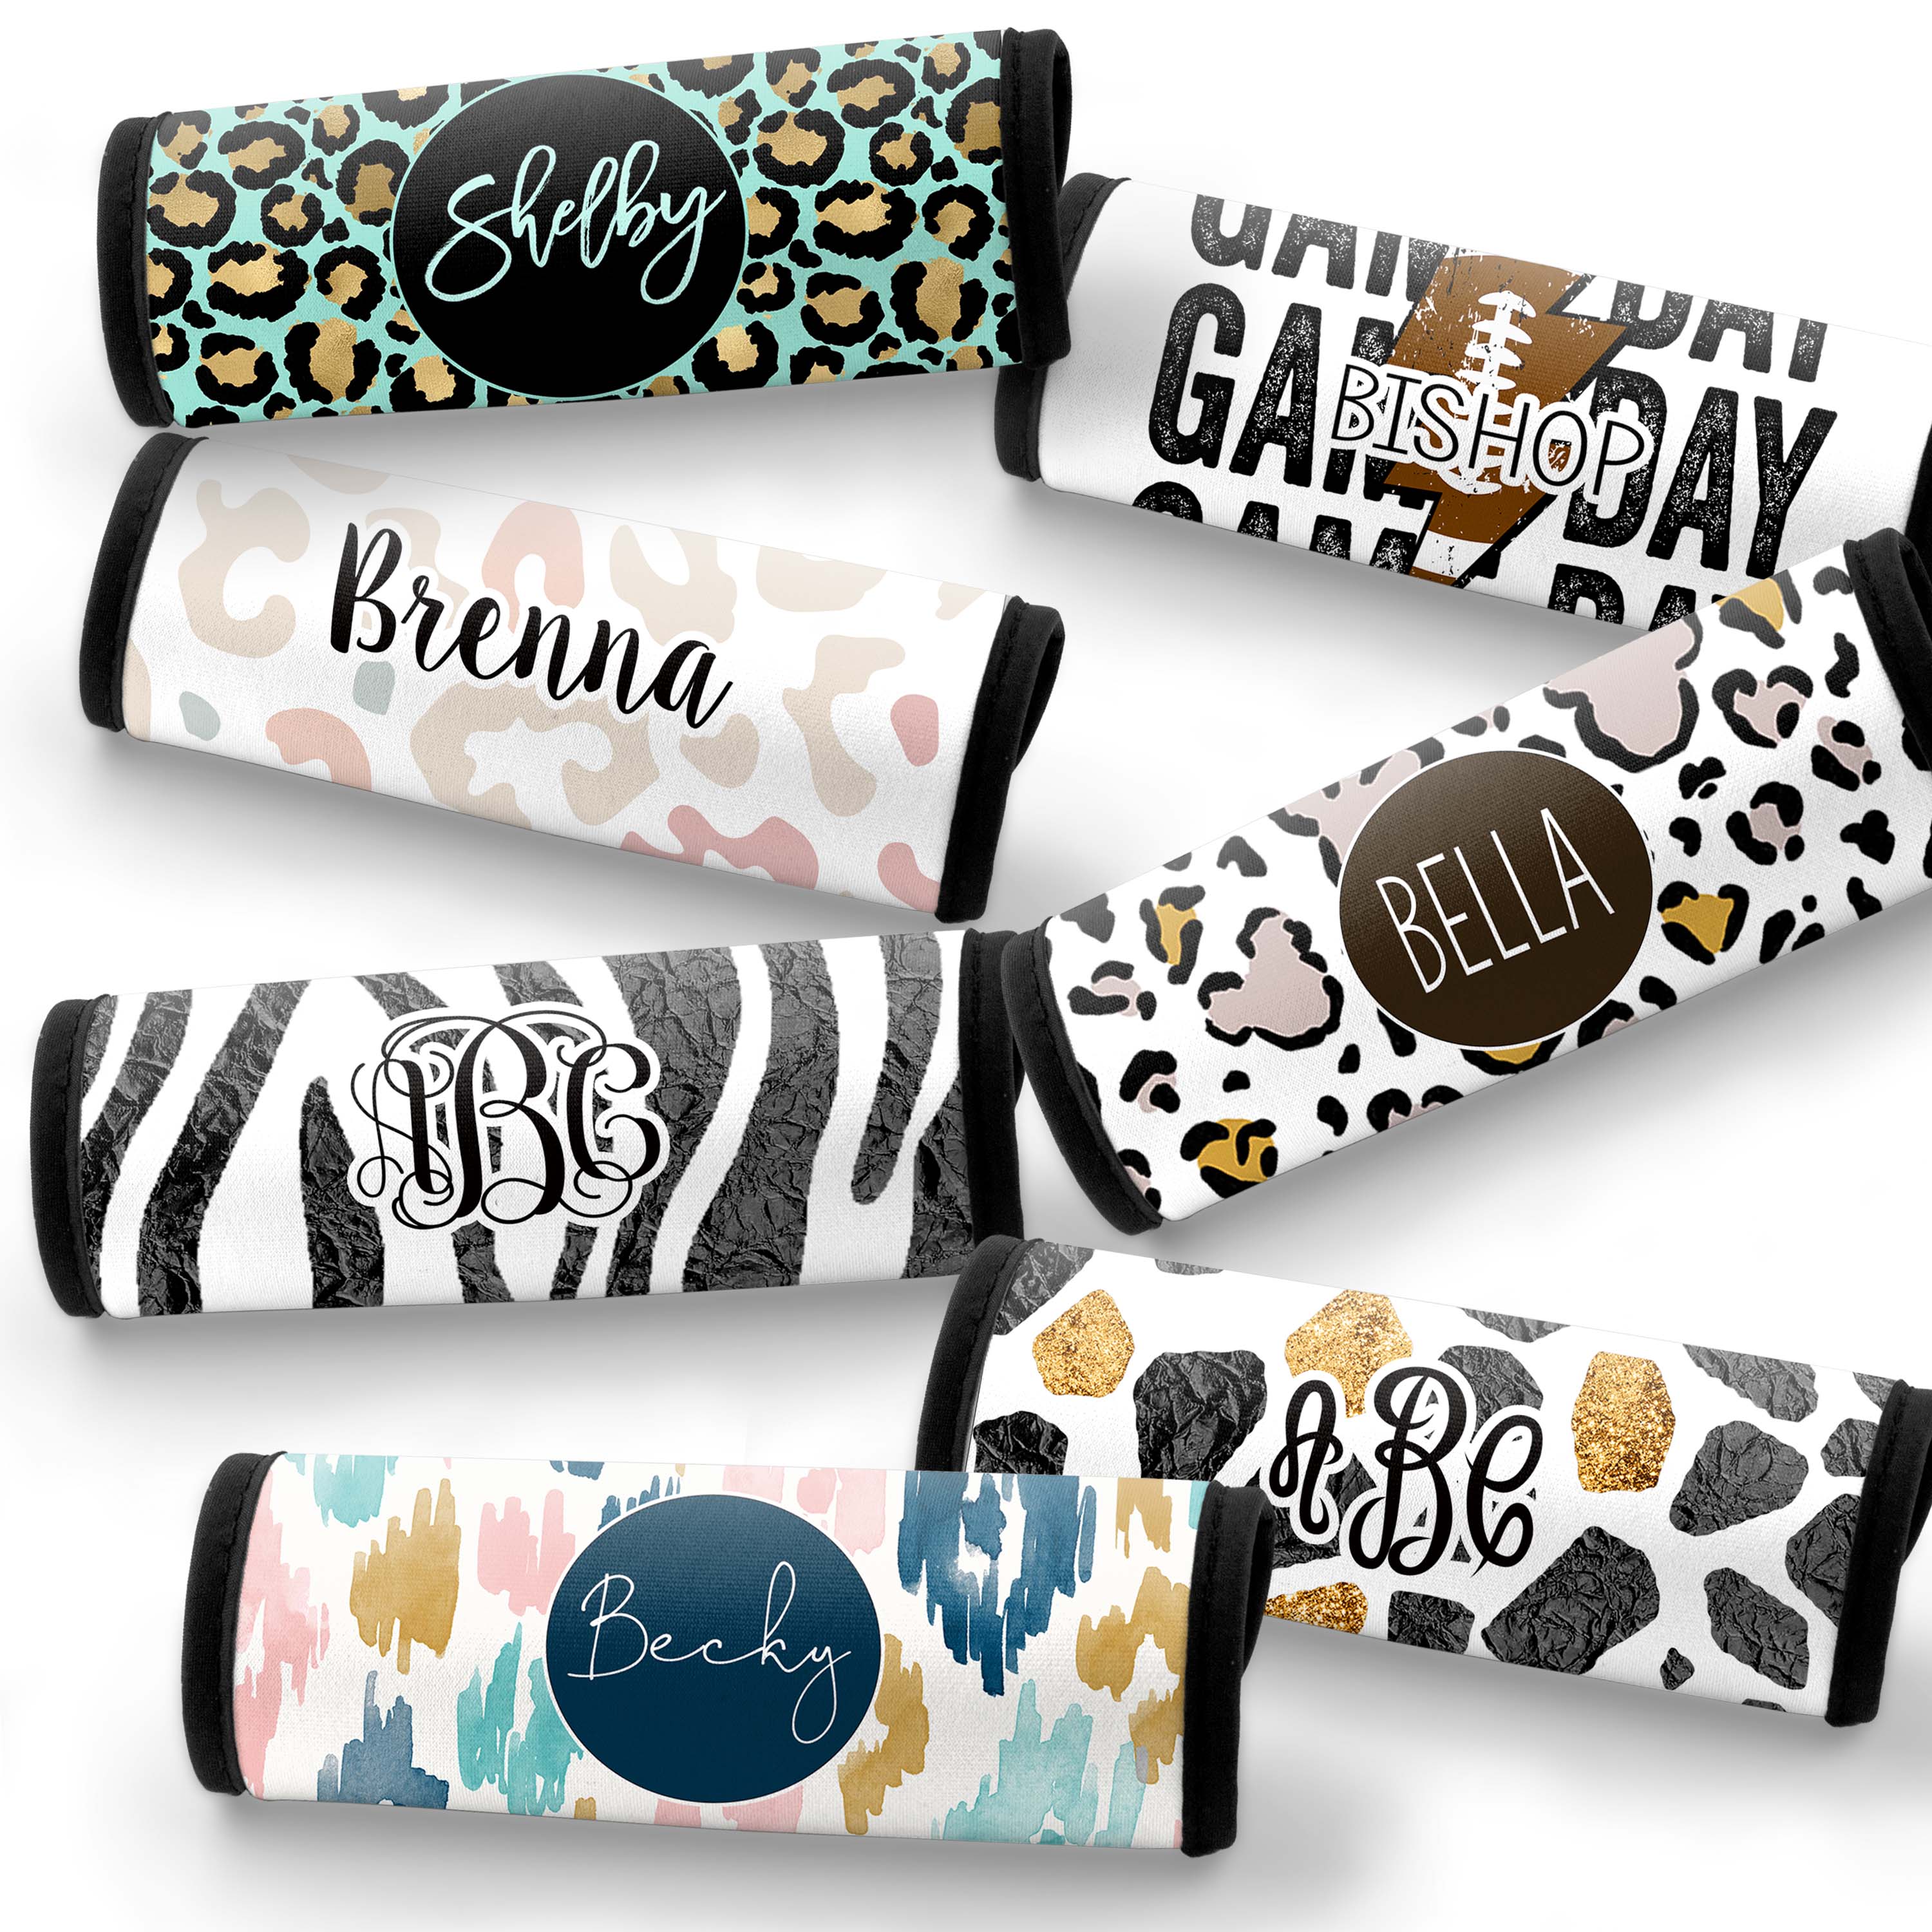 Personalized Luggage Handle Wraps made with sublimation printing